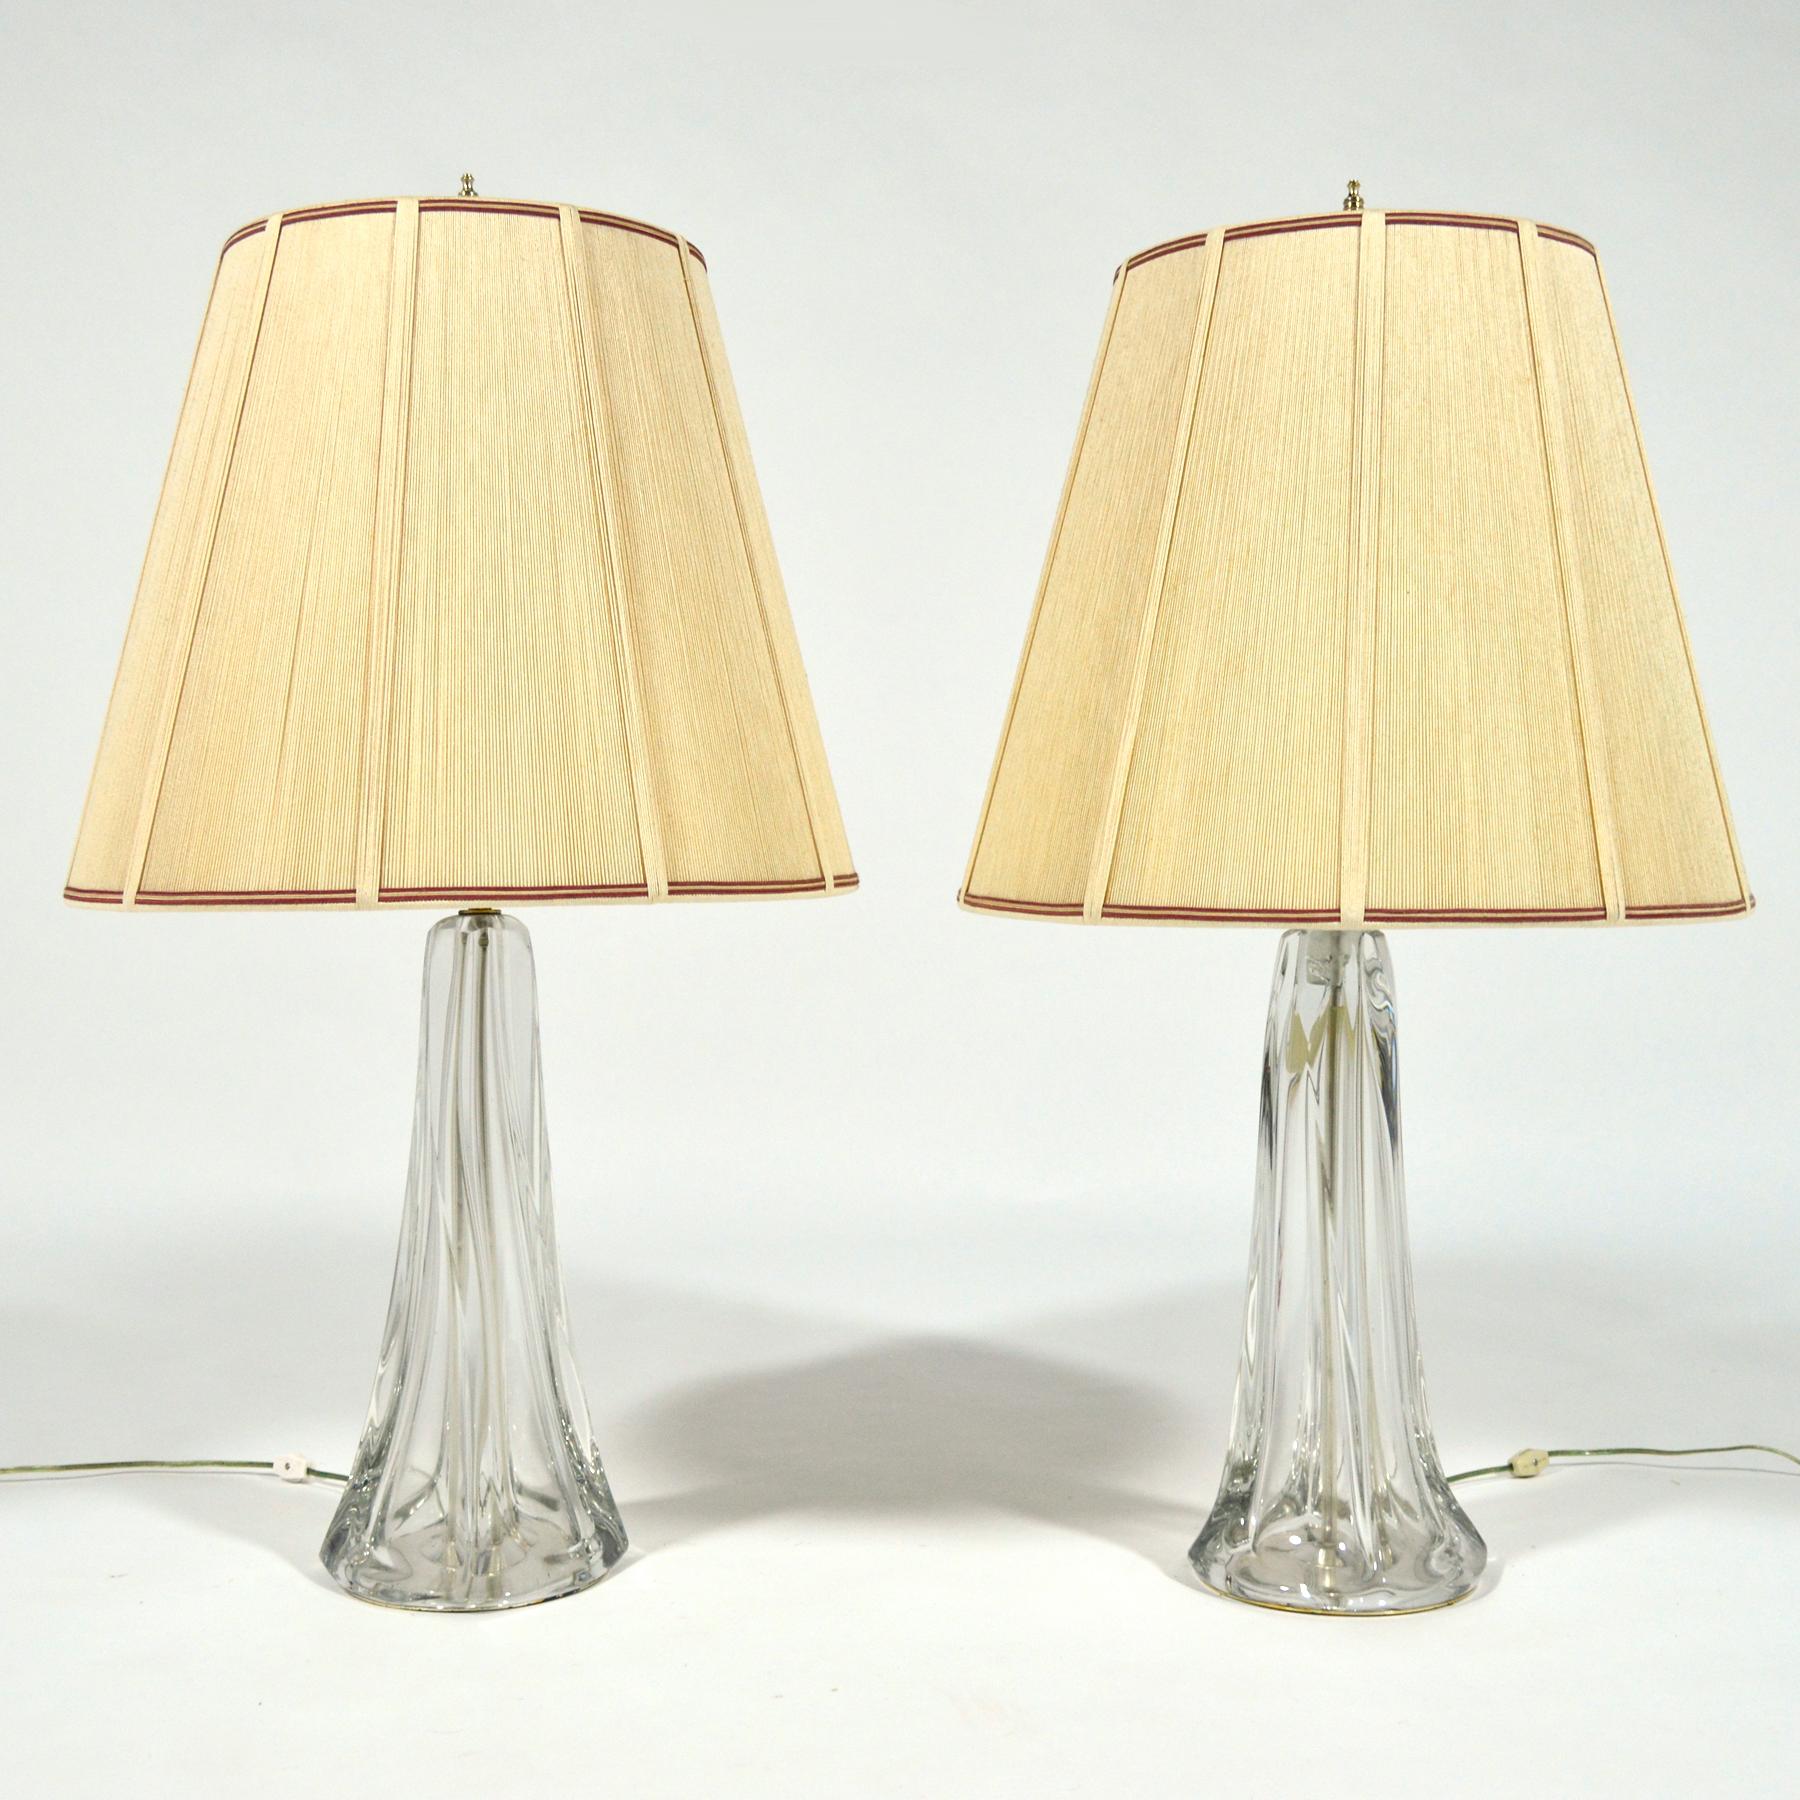 Pair of Large Crystal Table Lamps In Good Condition For Sale In Highland, IN